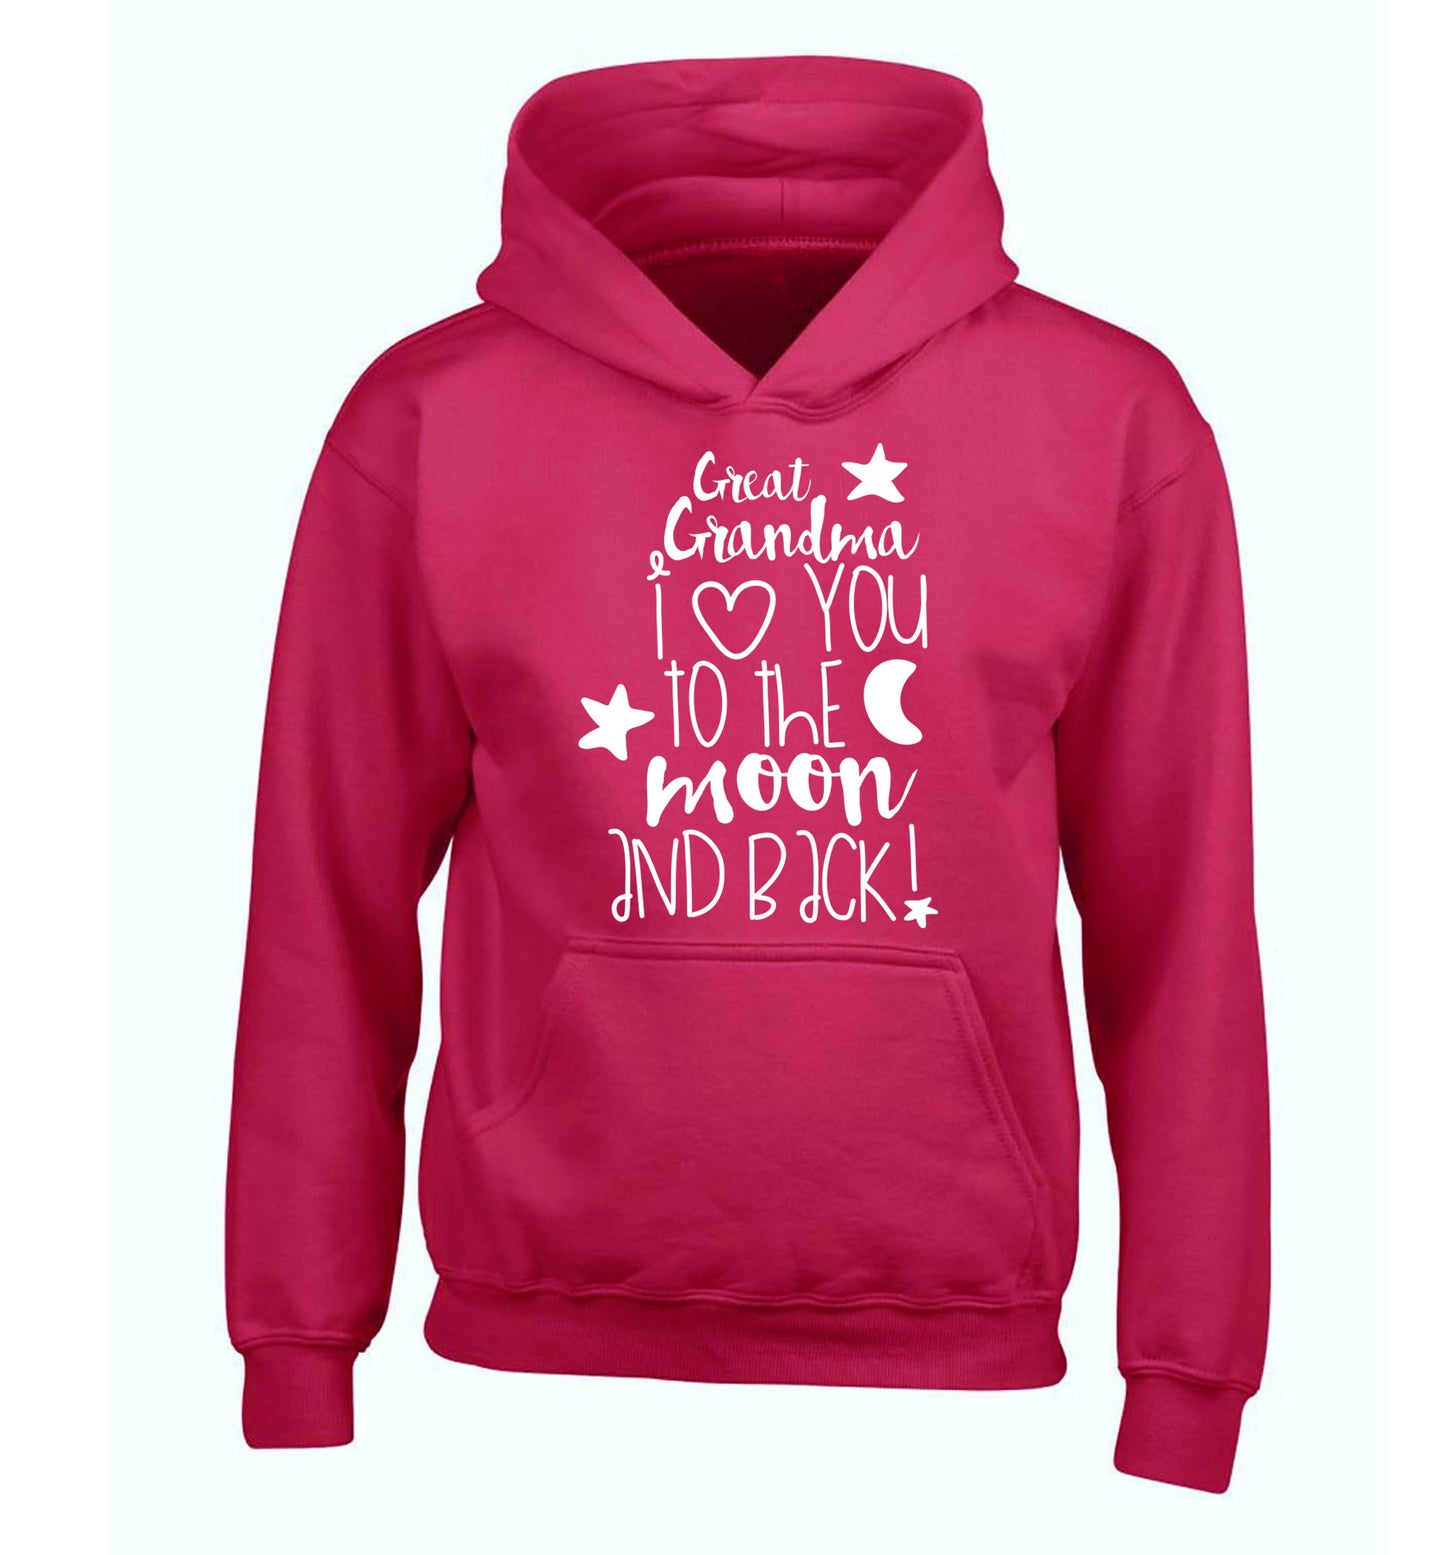 Great Grandma I love you to the moon and back children's pink hoodie 12-14 Years